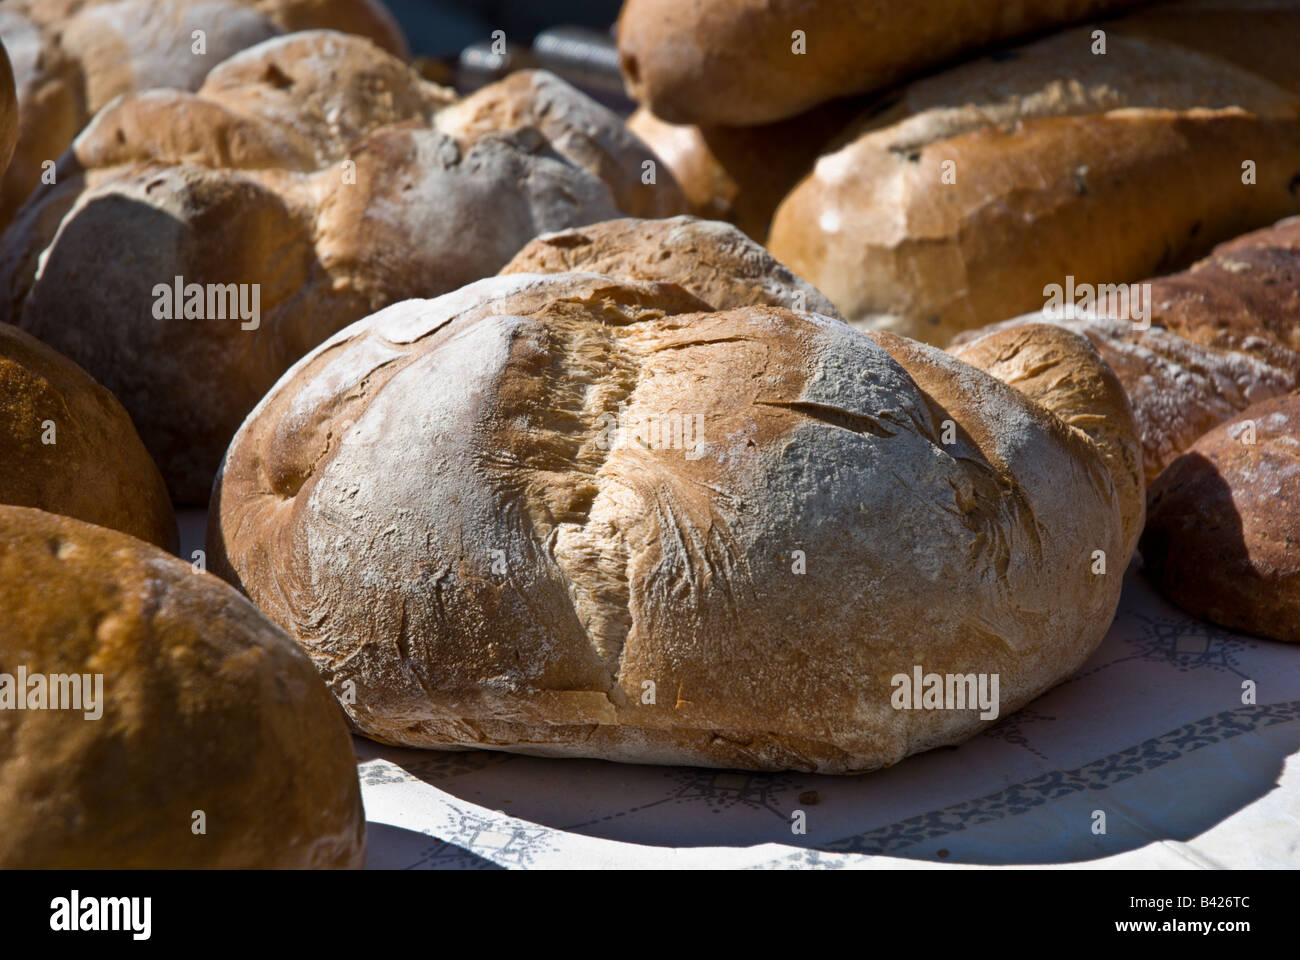 Fresh Milan style bread sits on a table at the farmer s market Stock Photo